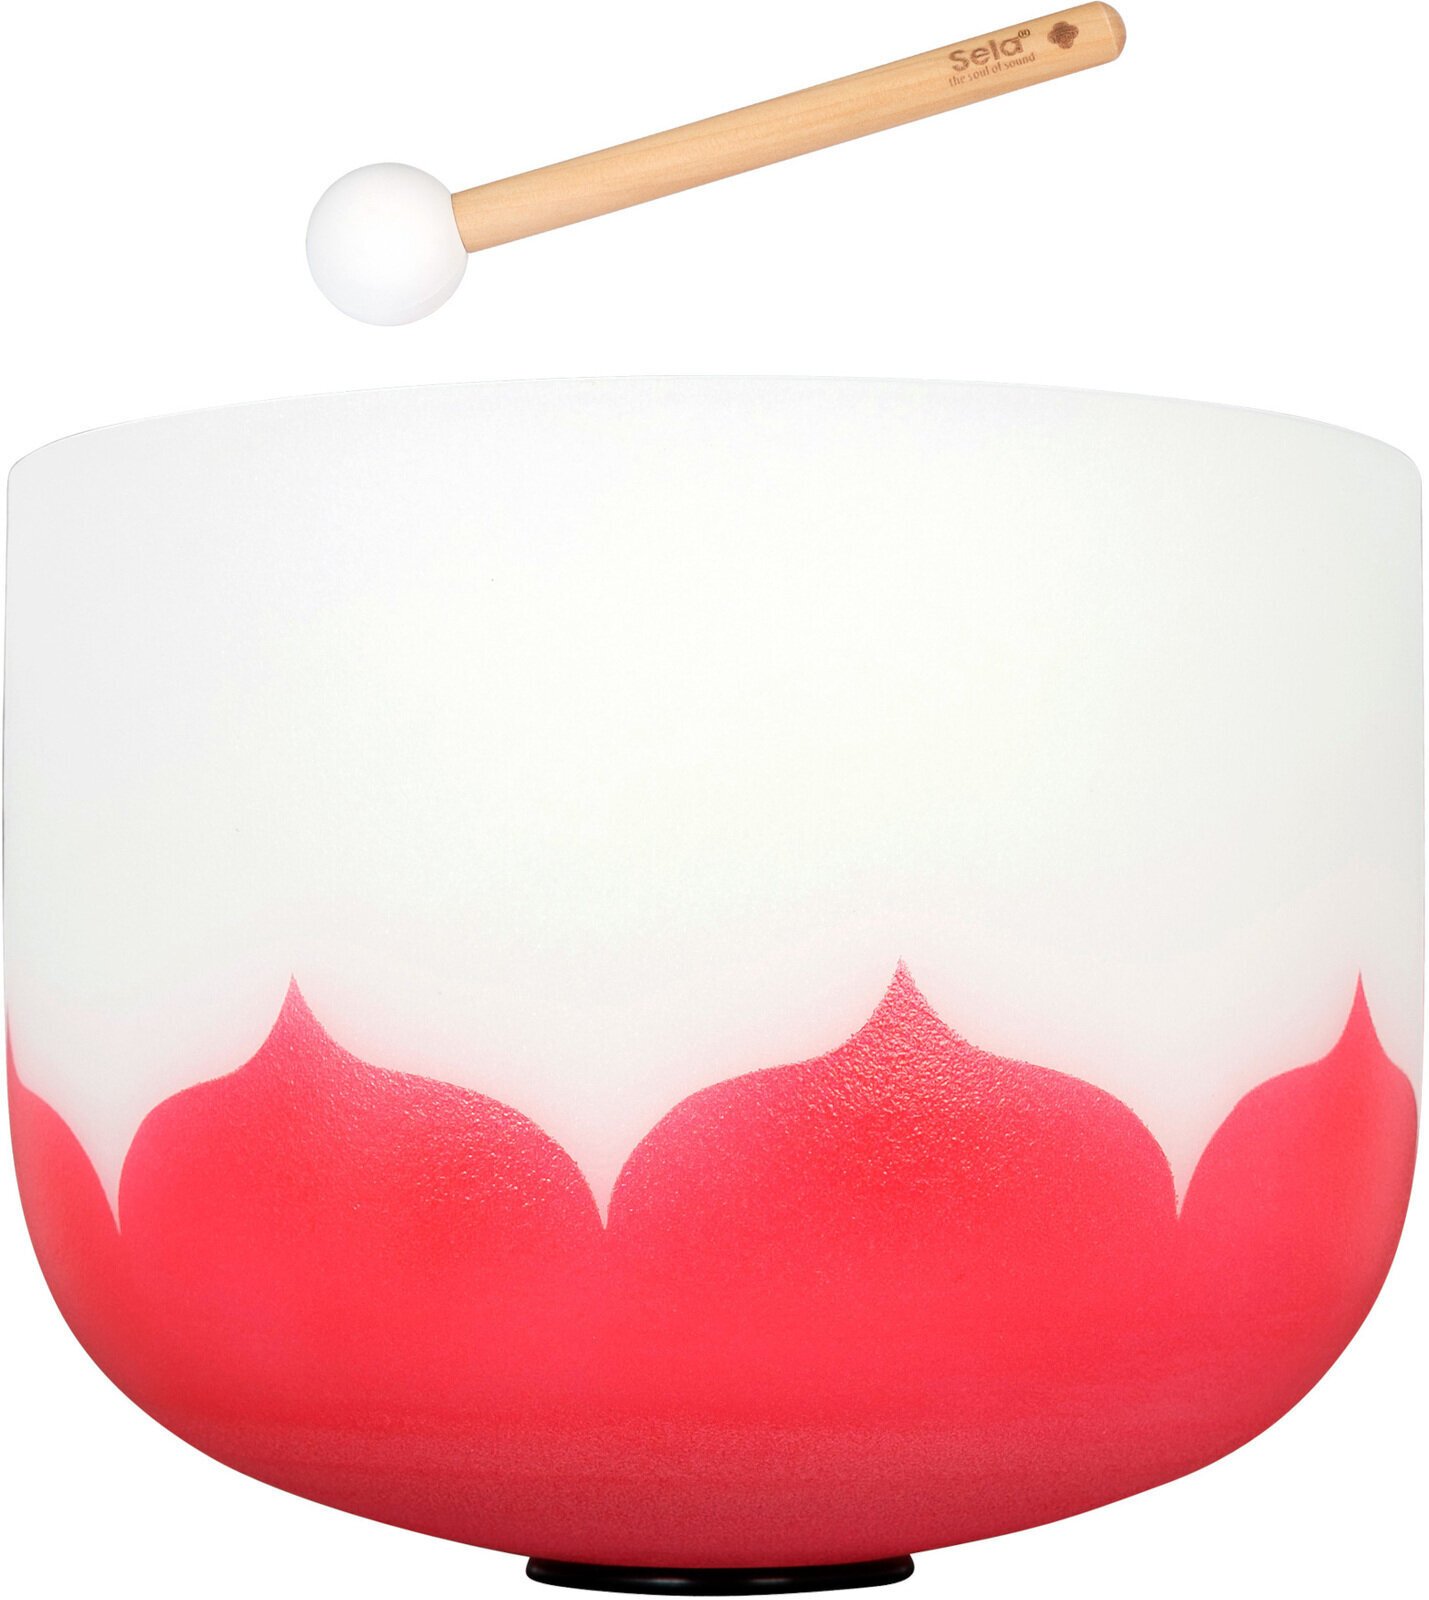 Percussions musicothérapeutiques Sela 14“ Crystal Singing Bowl Set Lotus 432Hz C - Red (Root Chakra)